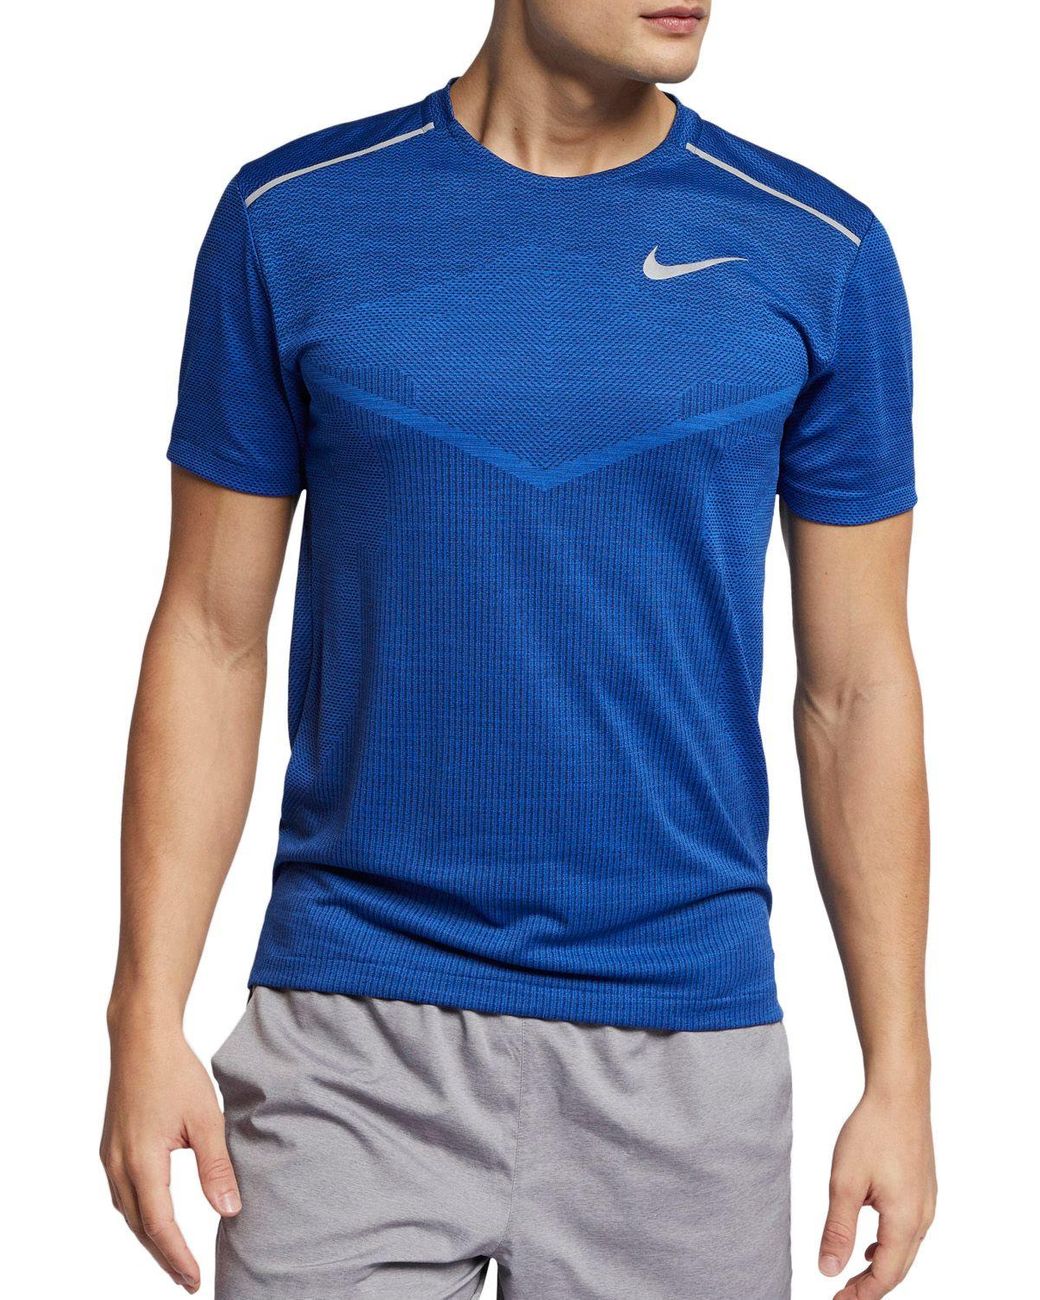 Nike Synthetic Techknit Cool Ultra Running Tee in Blue for Men - Lyst